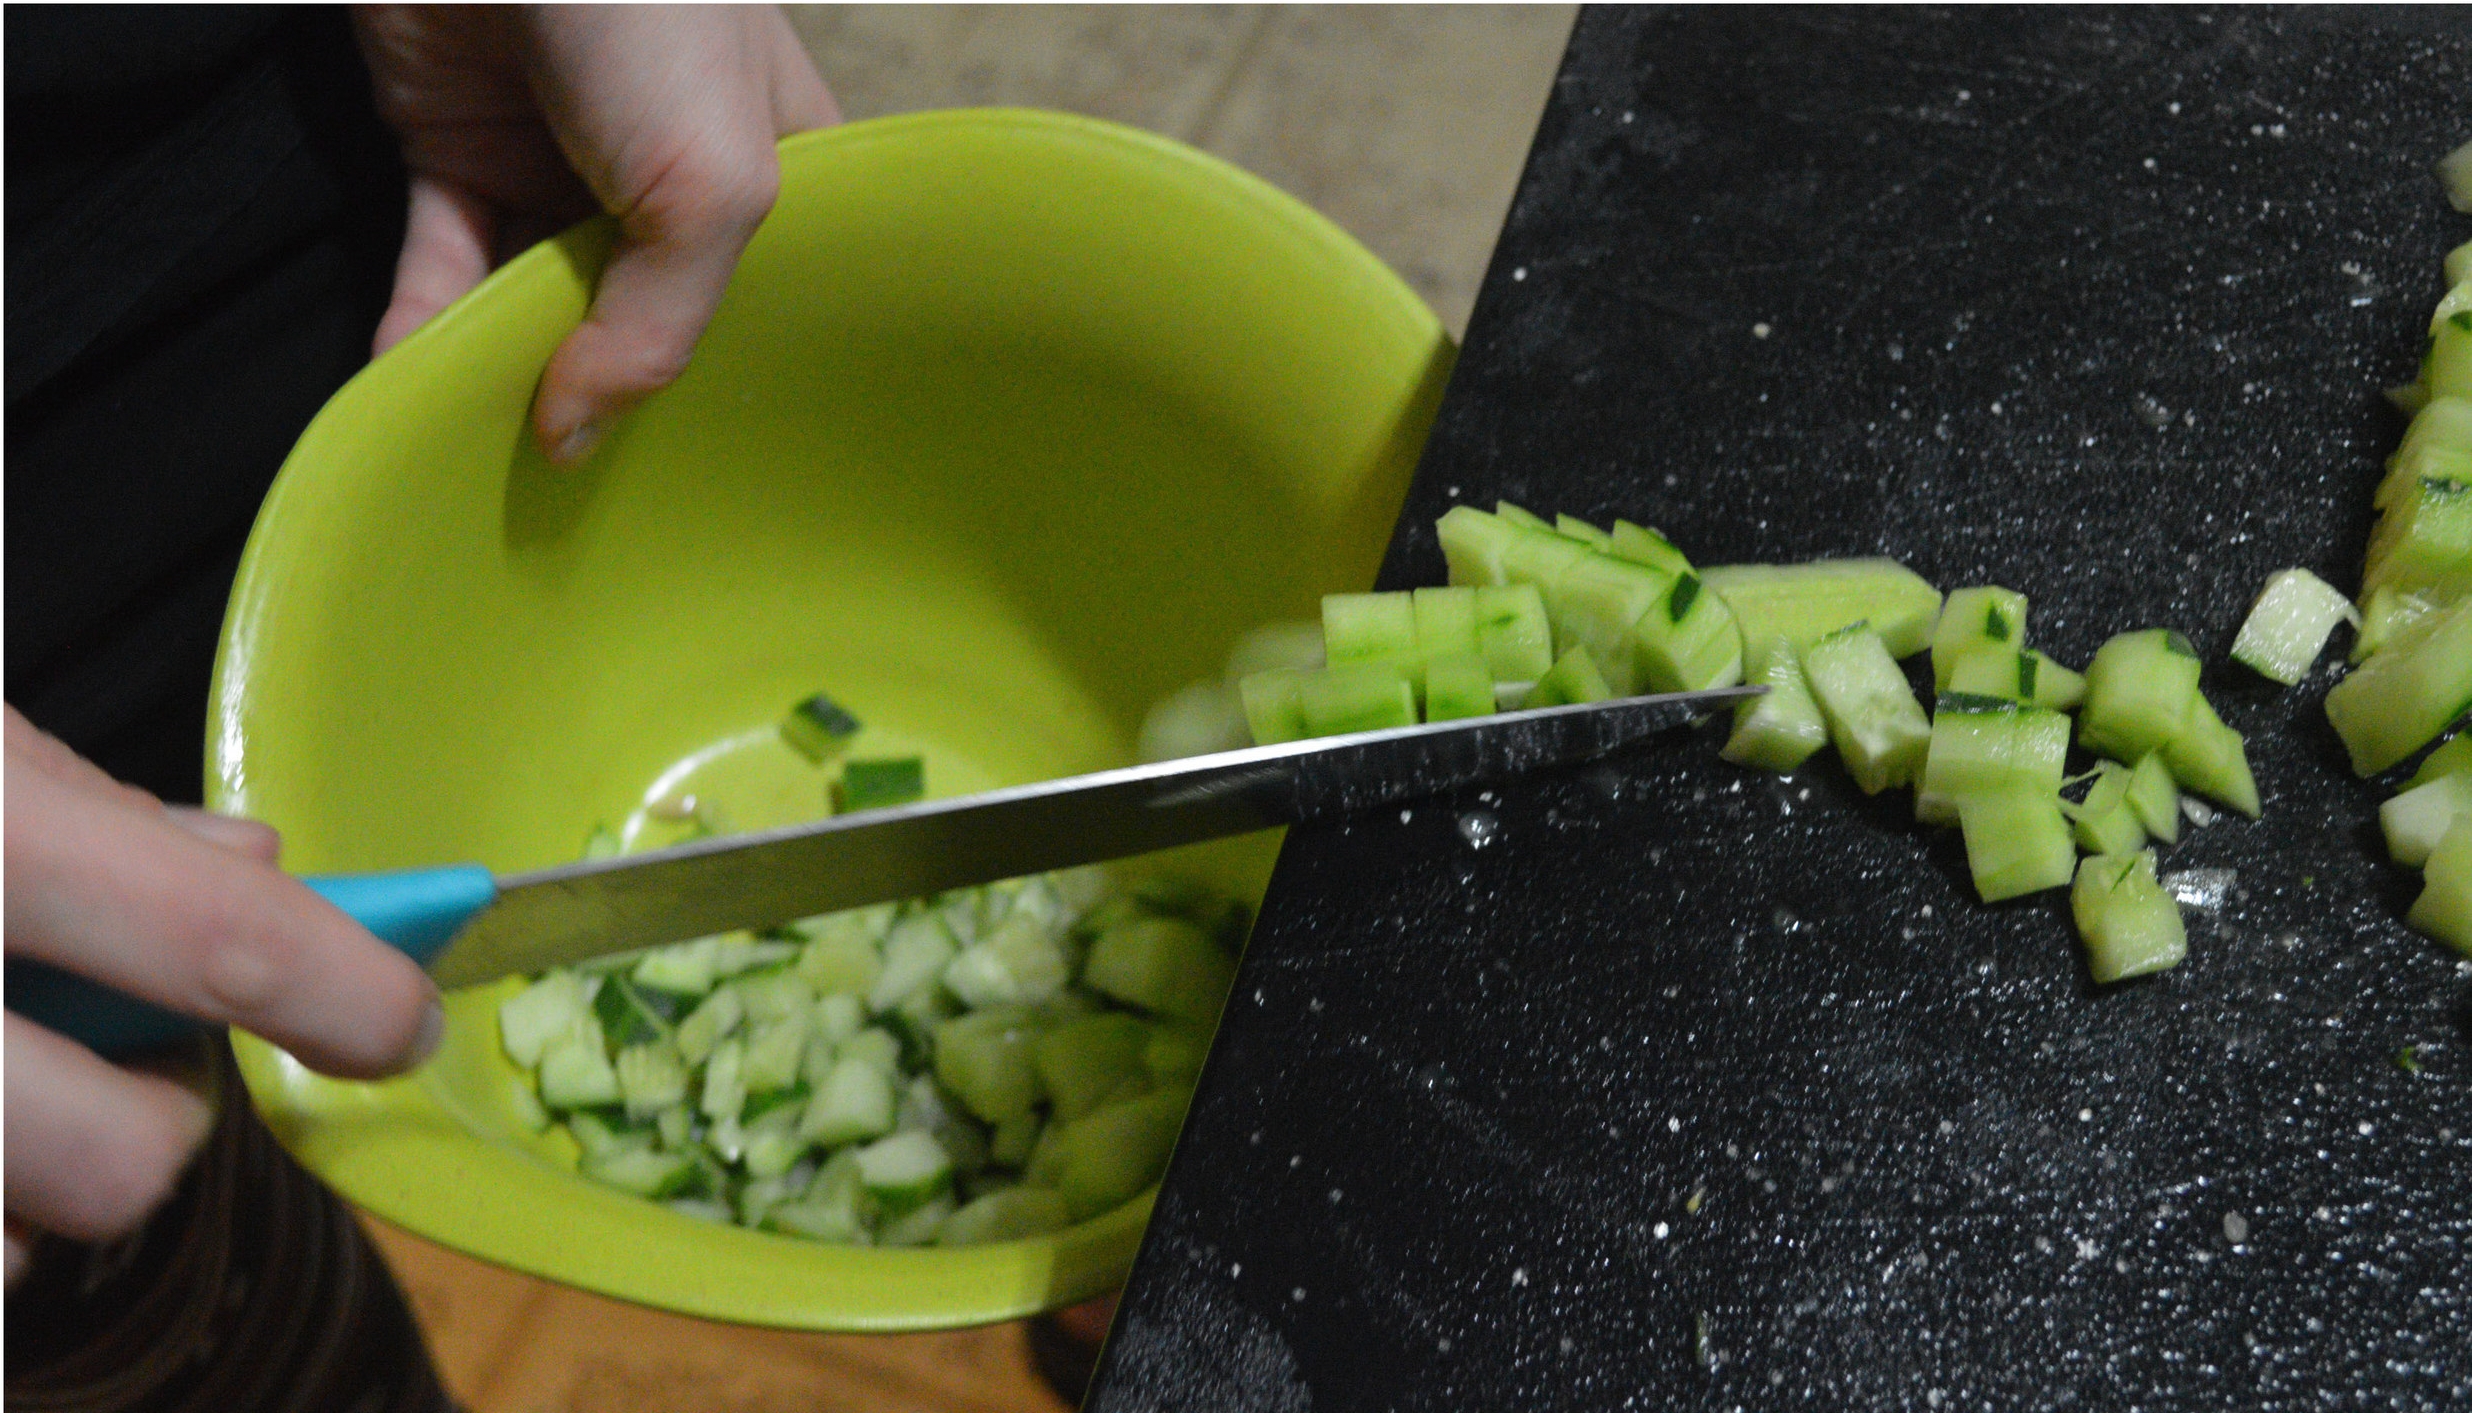 KITCHEN 2: A knife is used to push vegetables into a bowl from a cutting surface.